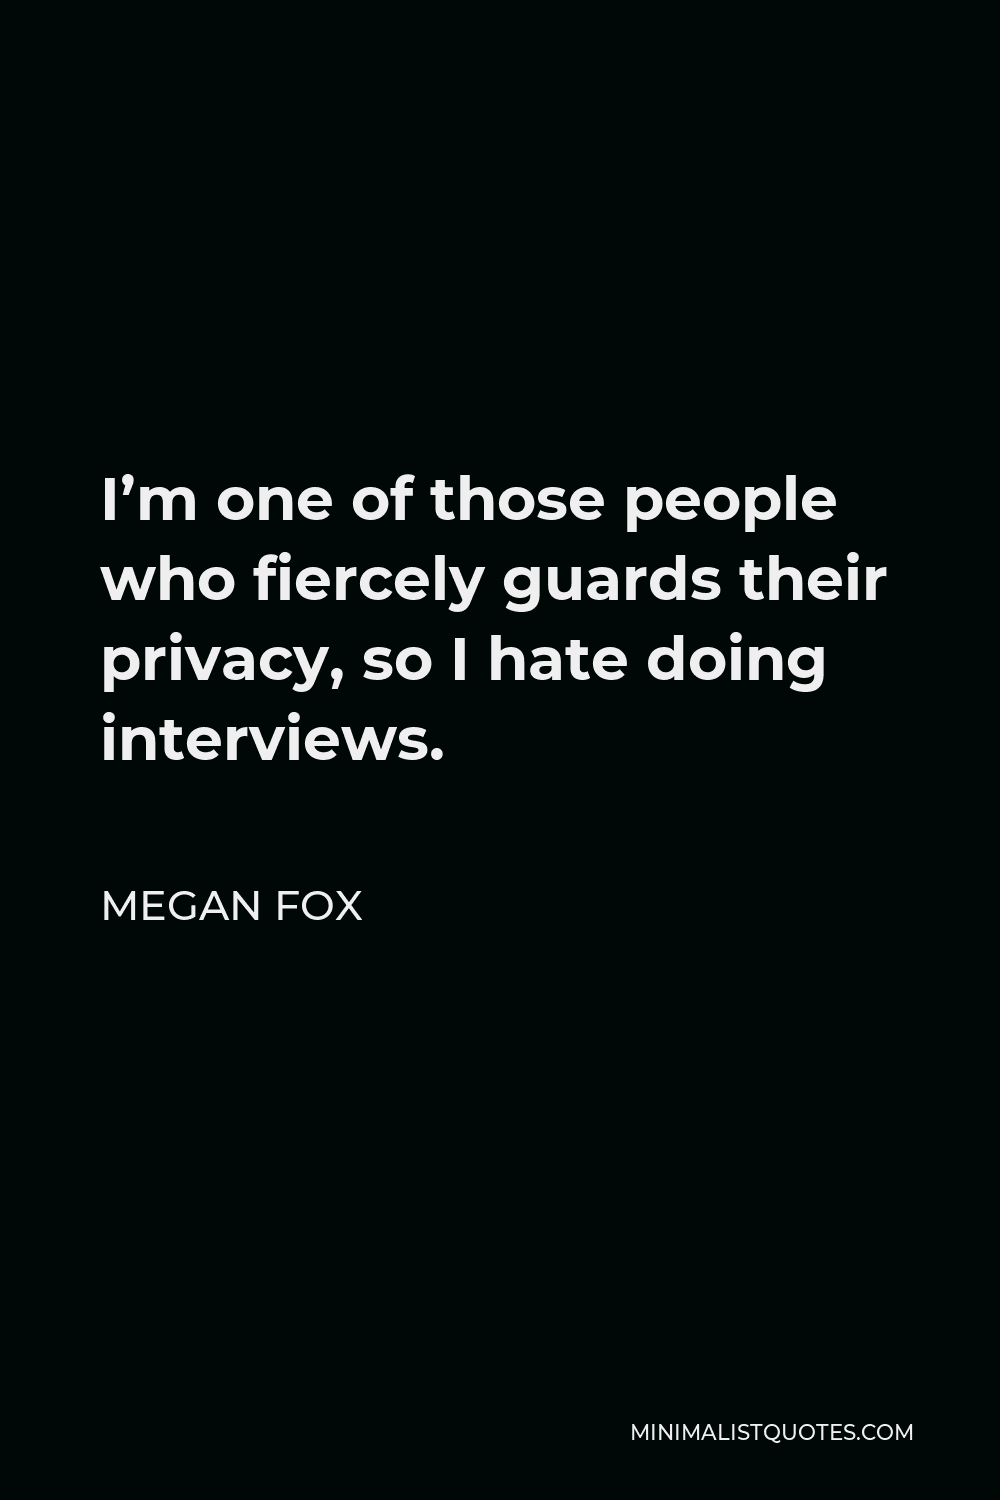 Megan Fox Quote - I’m one of those people who fiercely guards their privacy, so I hate doing interviews.